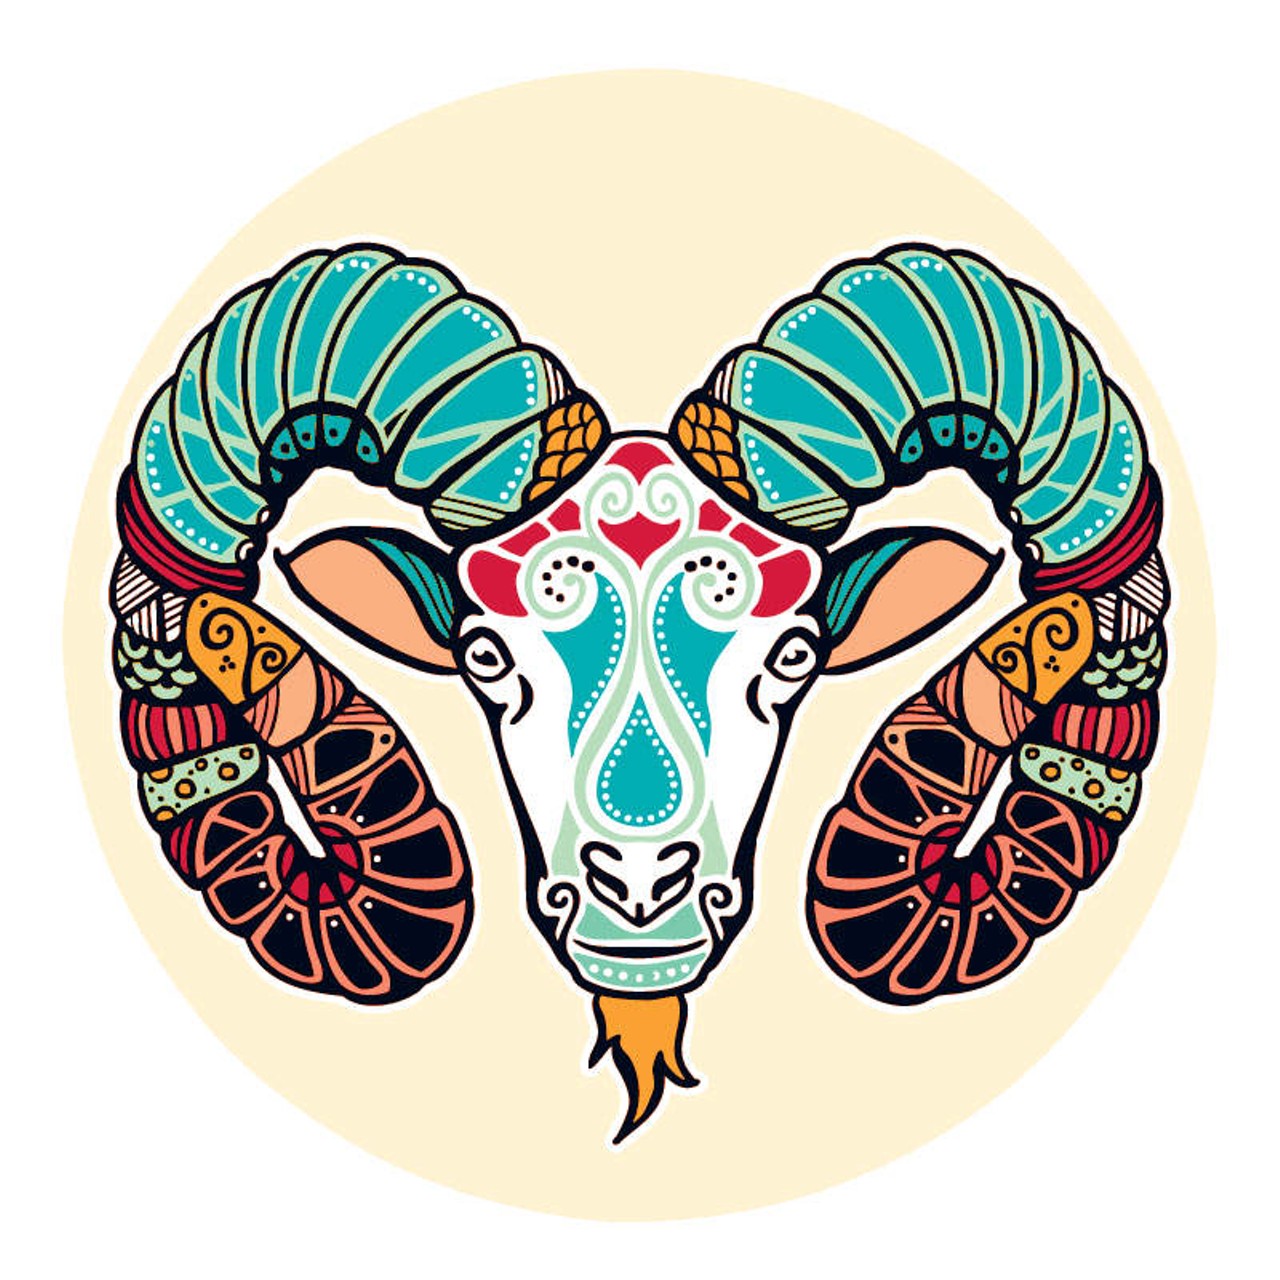 ARIES (March 21- April 20): 
Don&#146;t put a damper on your enthusiasm &#151; it&#146;s good to be excited about things. Just be aware that your responses are laced with the need to see what you want to see at a time when some of the people and situations you&#146;re attracting aren&#146;t what they might appear to be. If you decide to go ahead and let your impulses be your guide, make sure you bring your street smarts along. It looks to me like games you&#146;ve never played and people who are either narcissistic or just there to suck the life out of you could lead you down the garden path and leave you there to pick up the pieces.